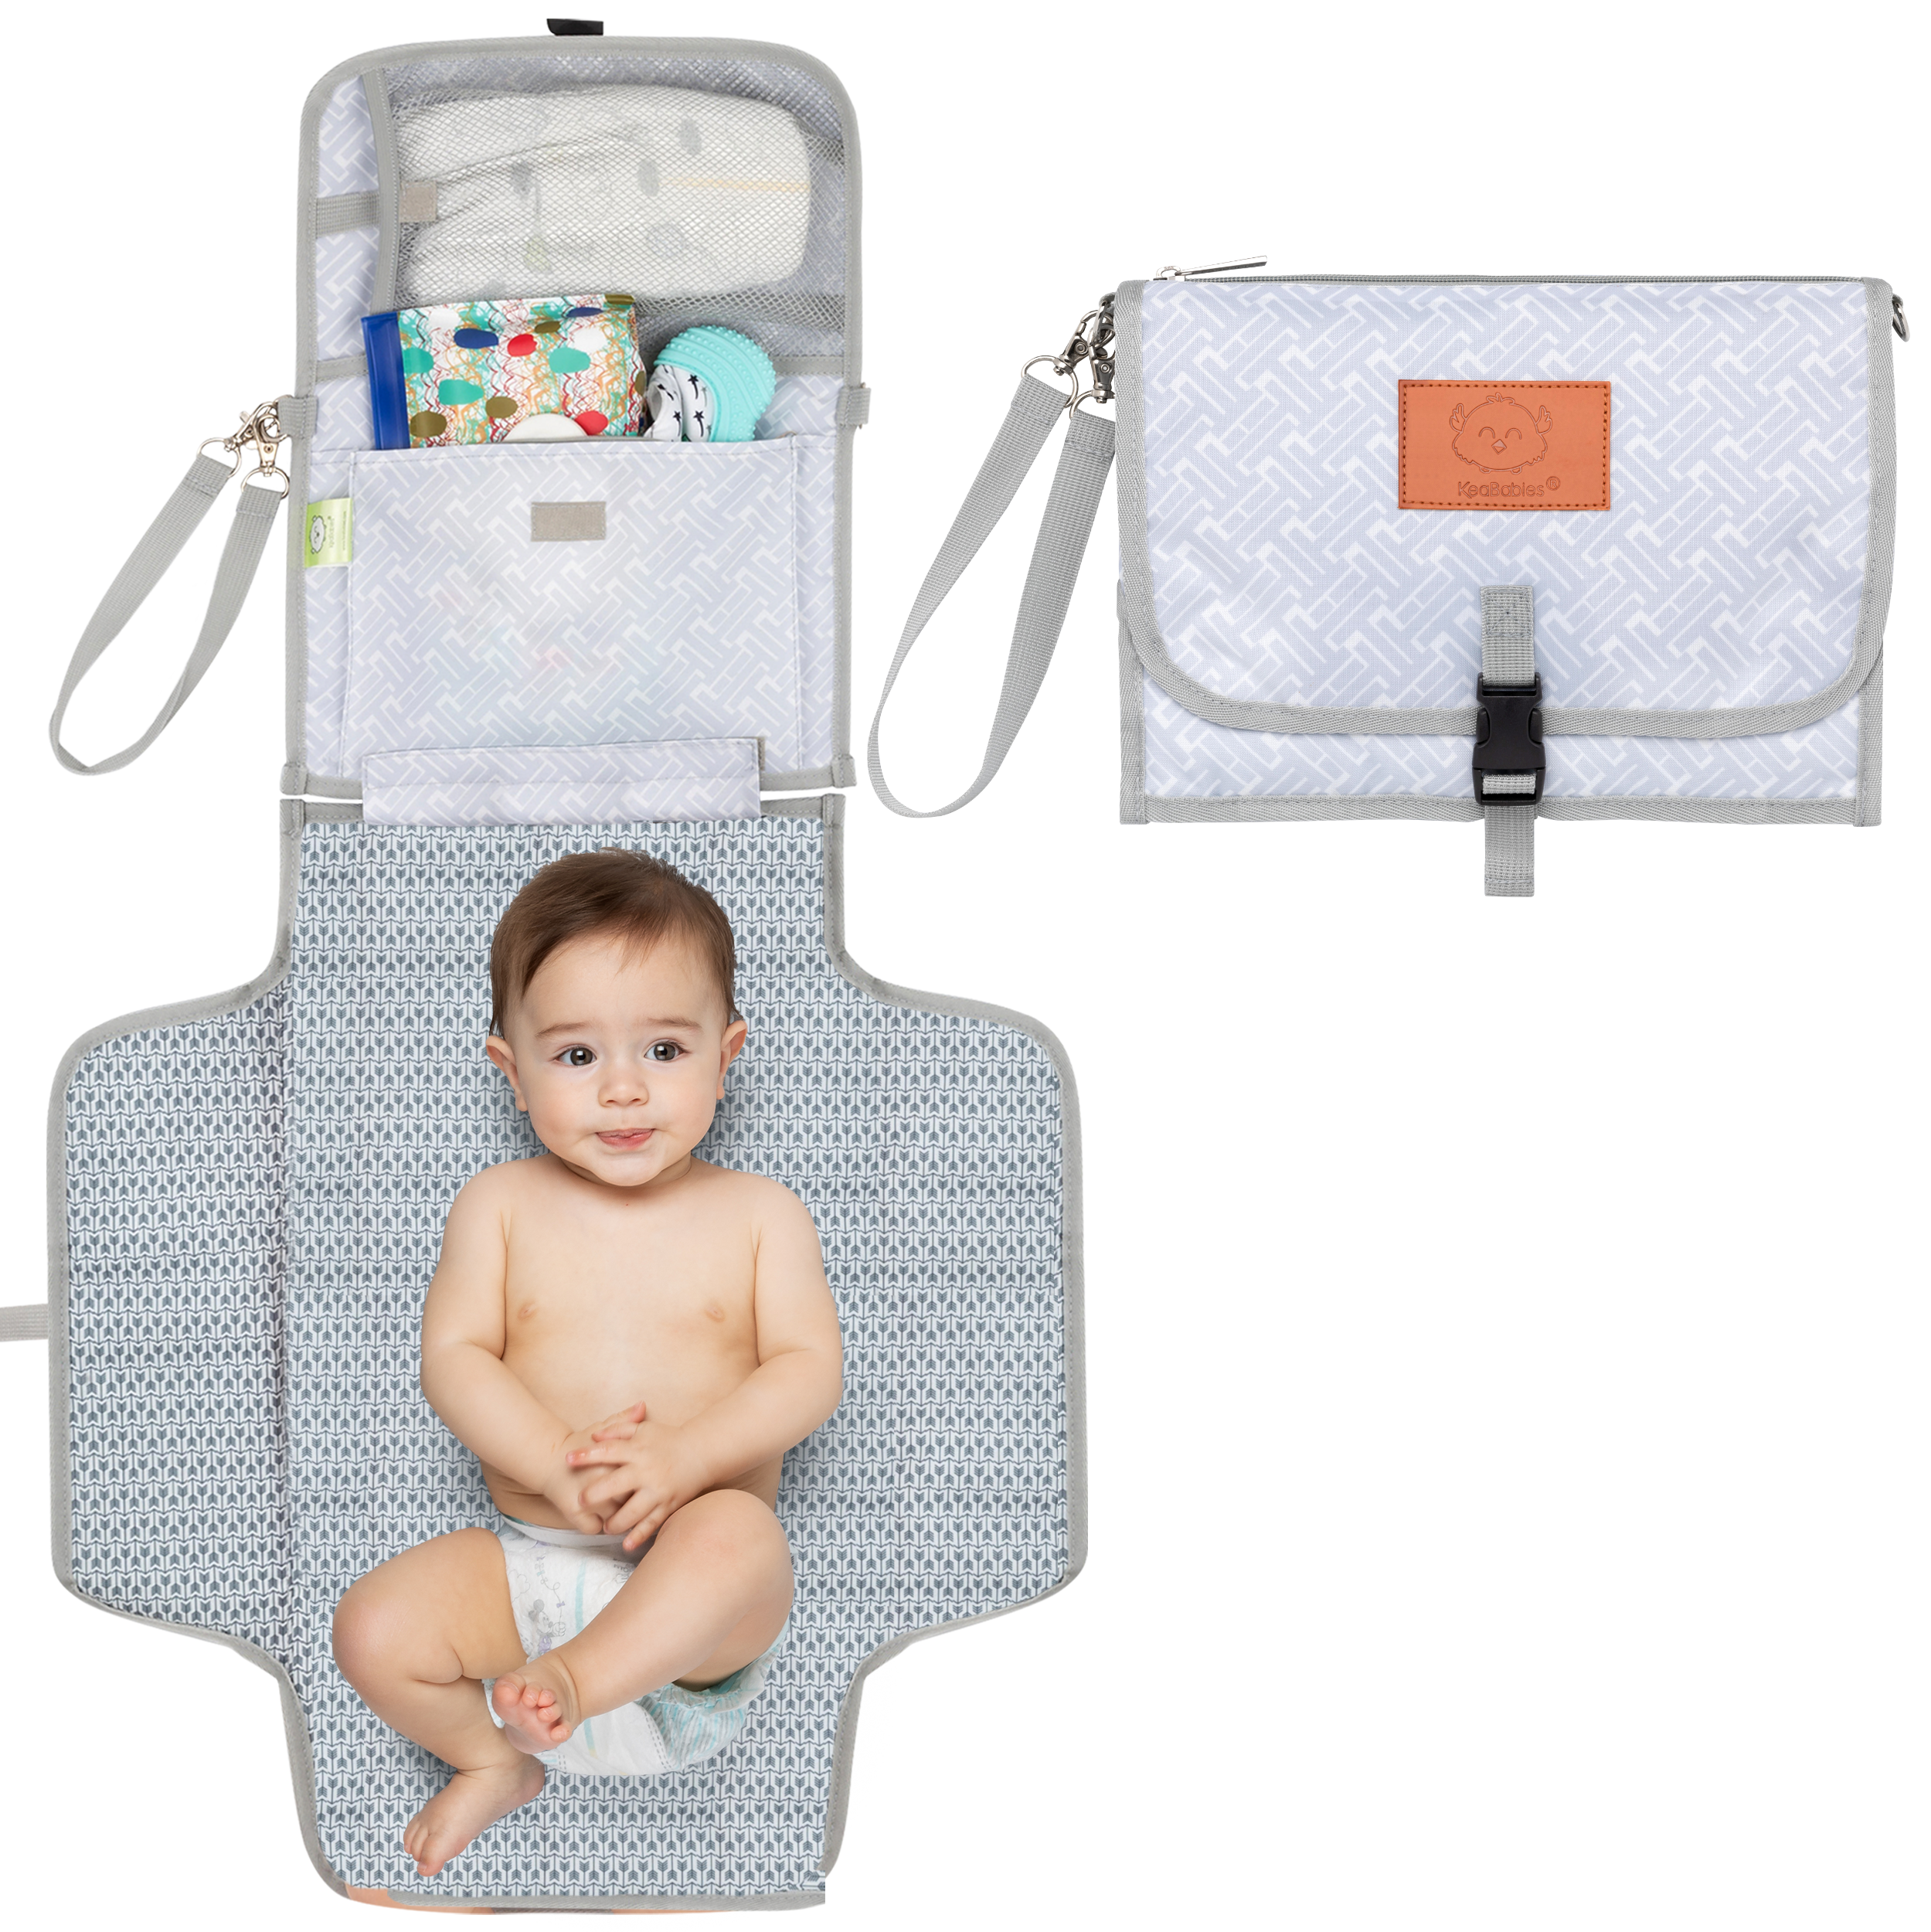 Portable Baby Changing Mat Nappy Waterproof Pad Home Travel Shower Mat White US 